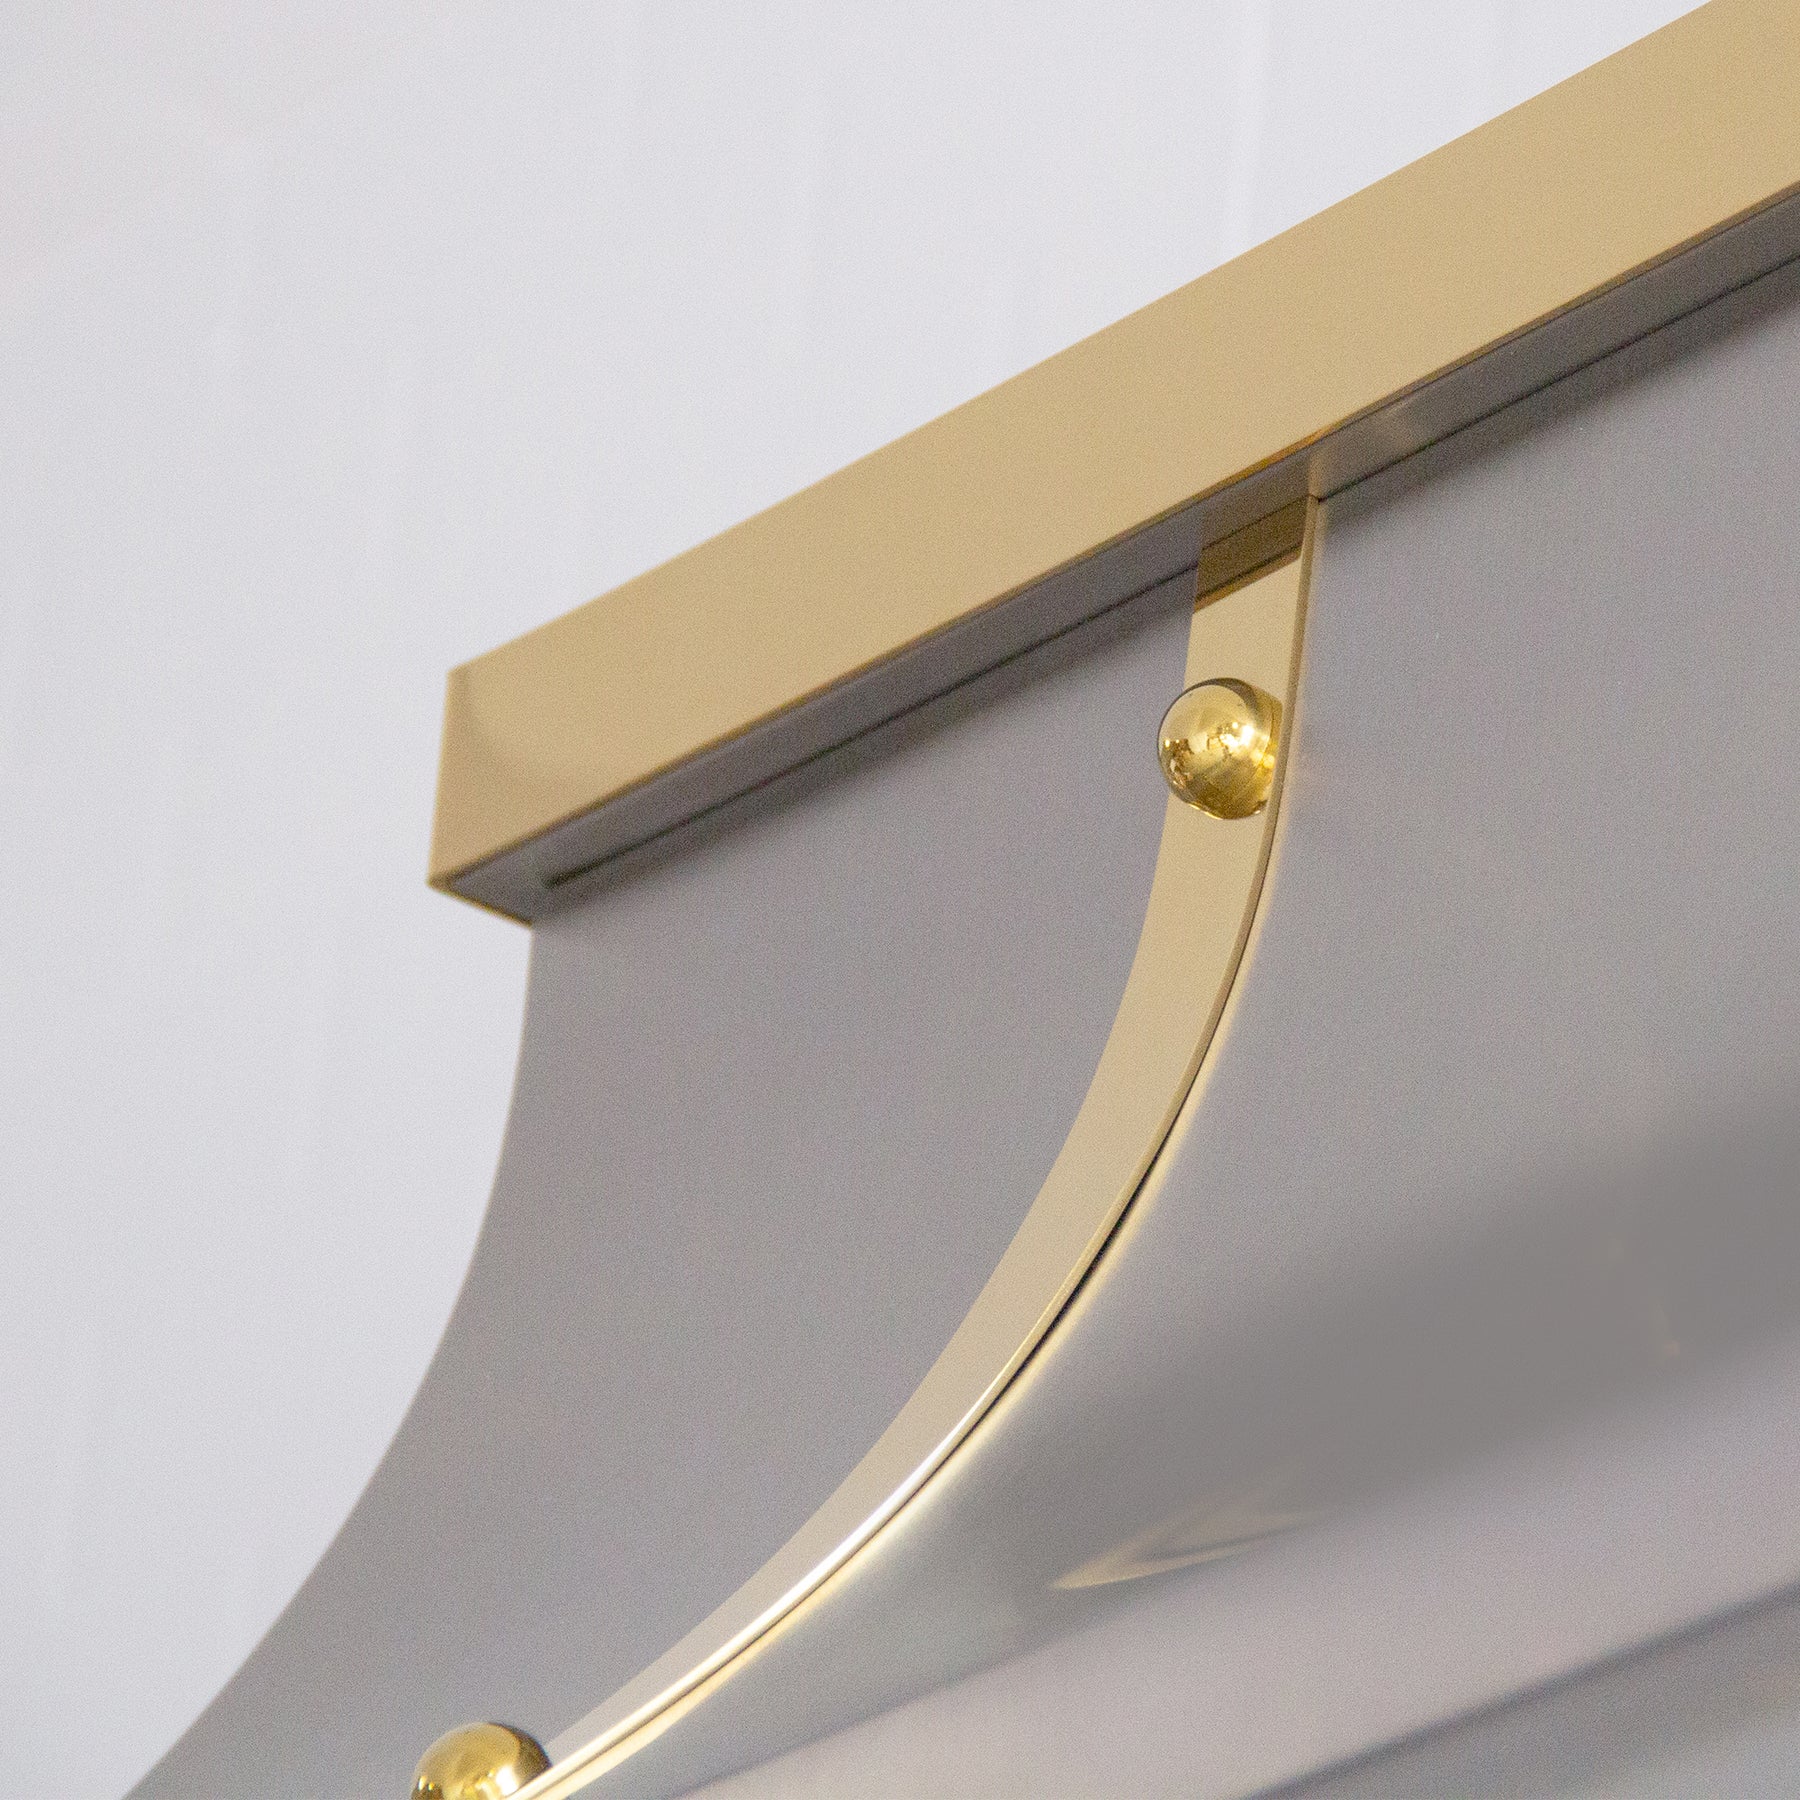 Fobest custom handmade brushed stainless steel range hood with brass straps and rivets installed in the white kitchen